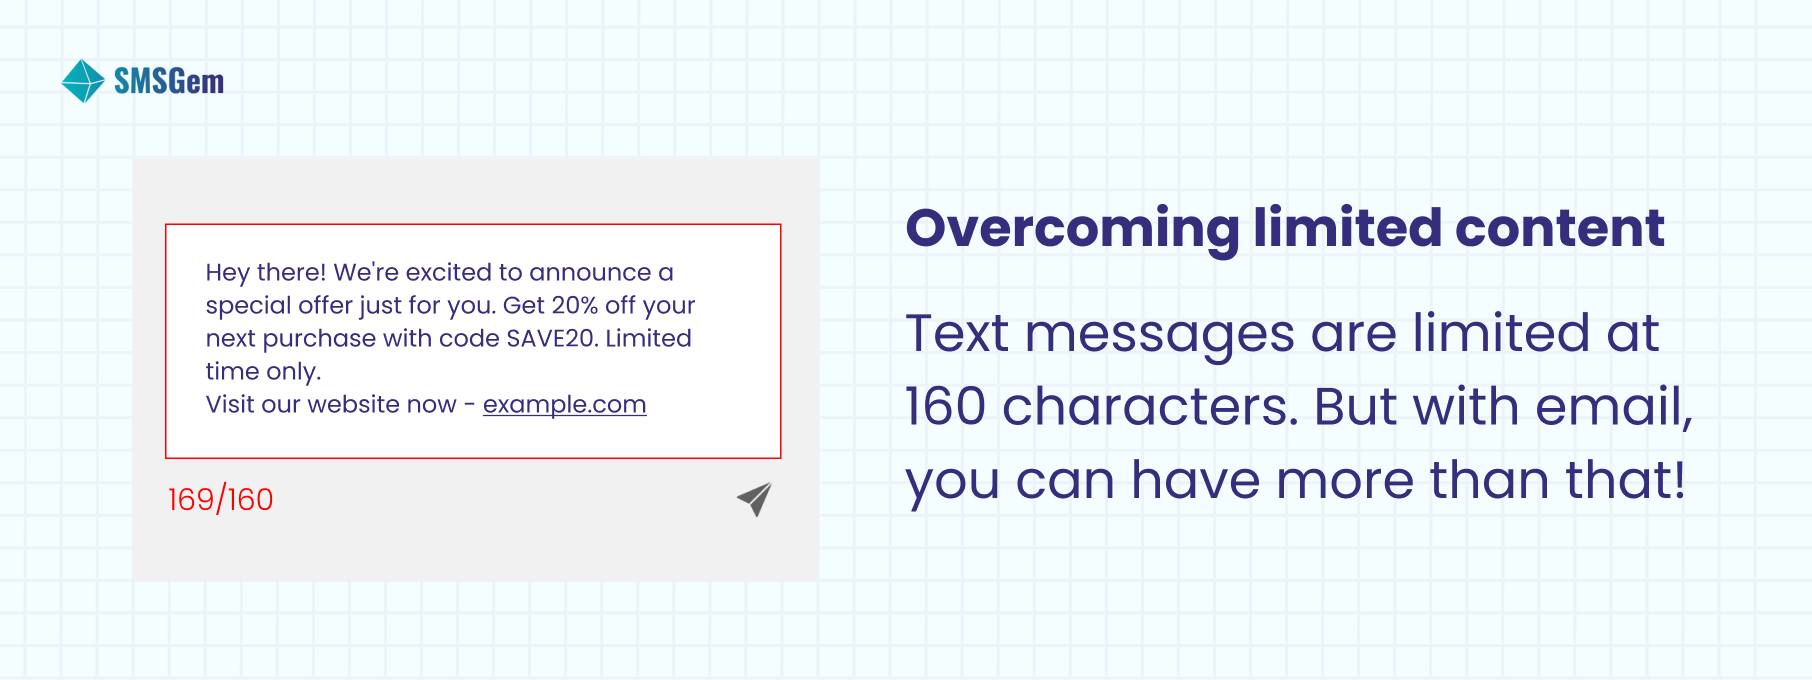 Email Marketing can solve SMS Marketing weakness: Limited 160 characters